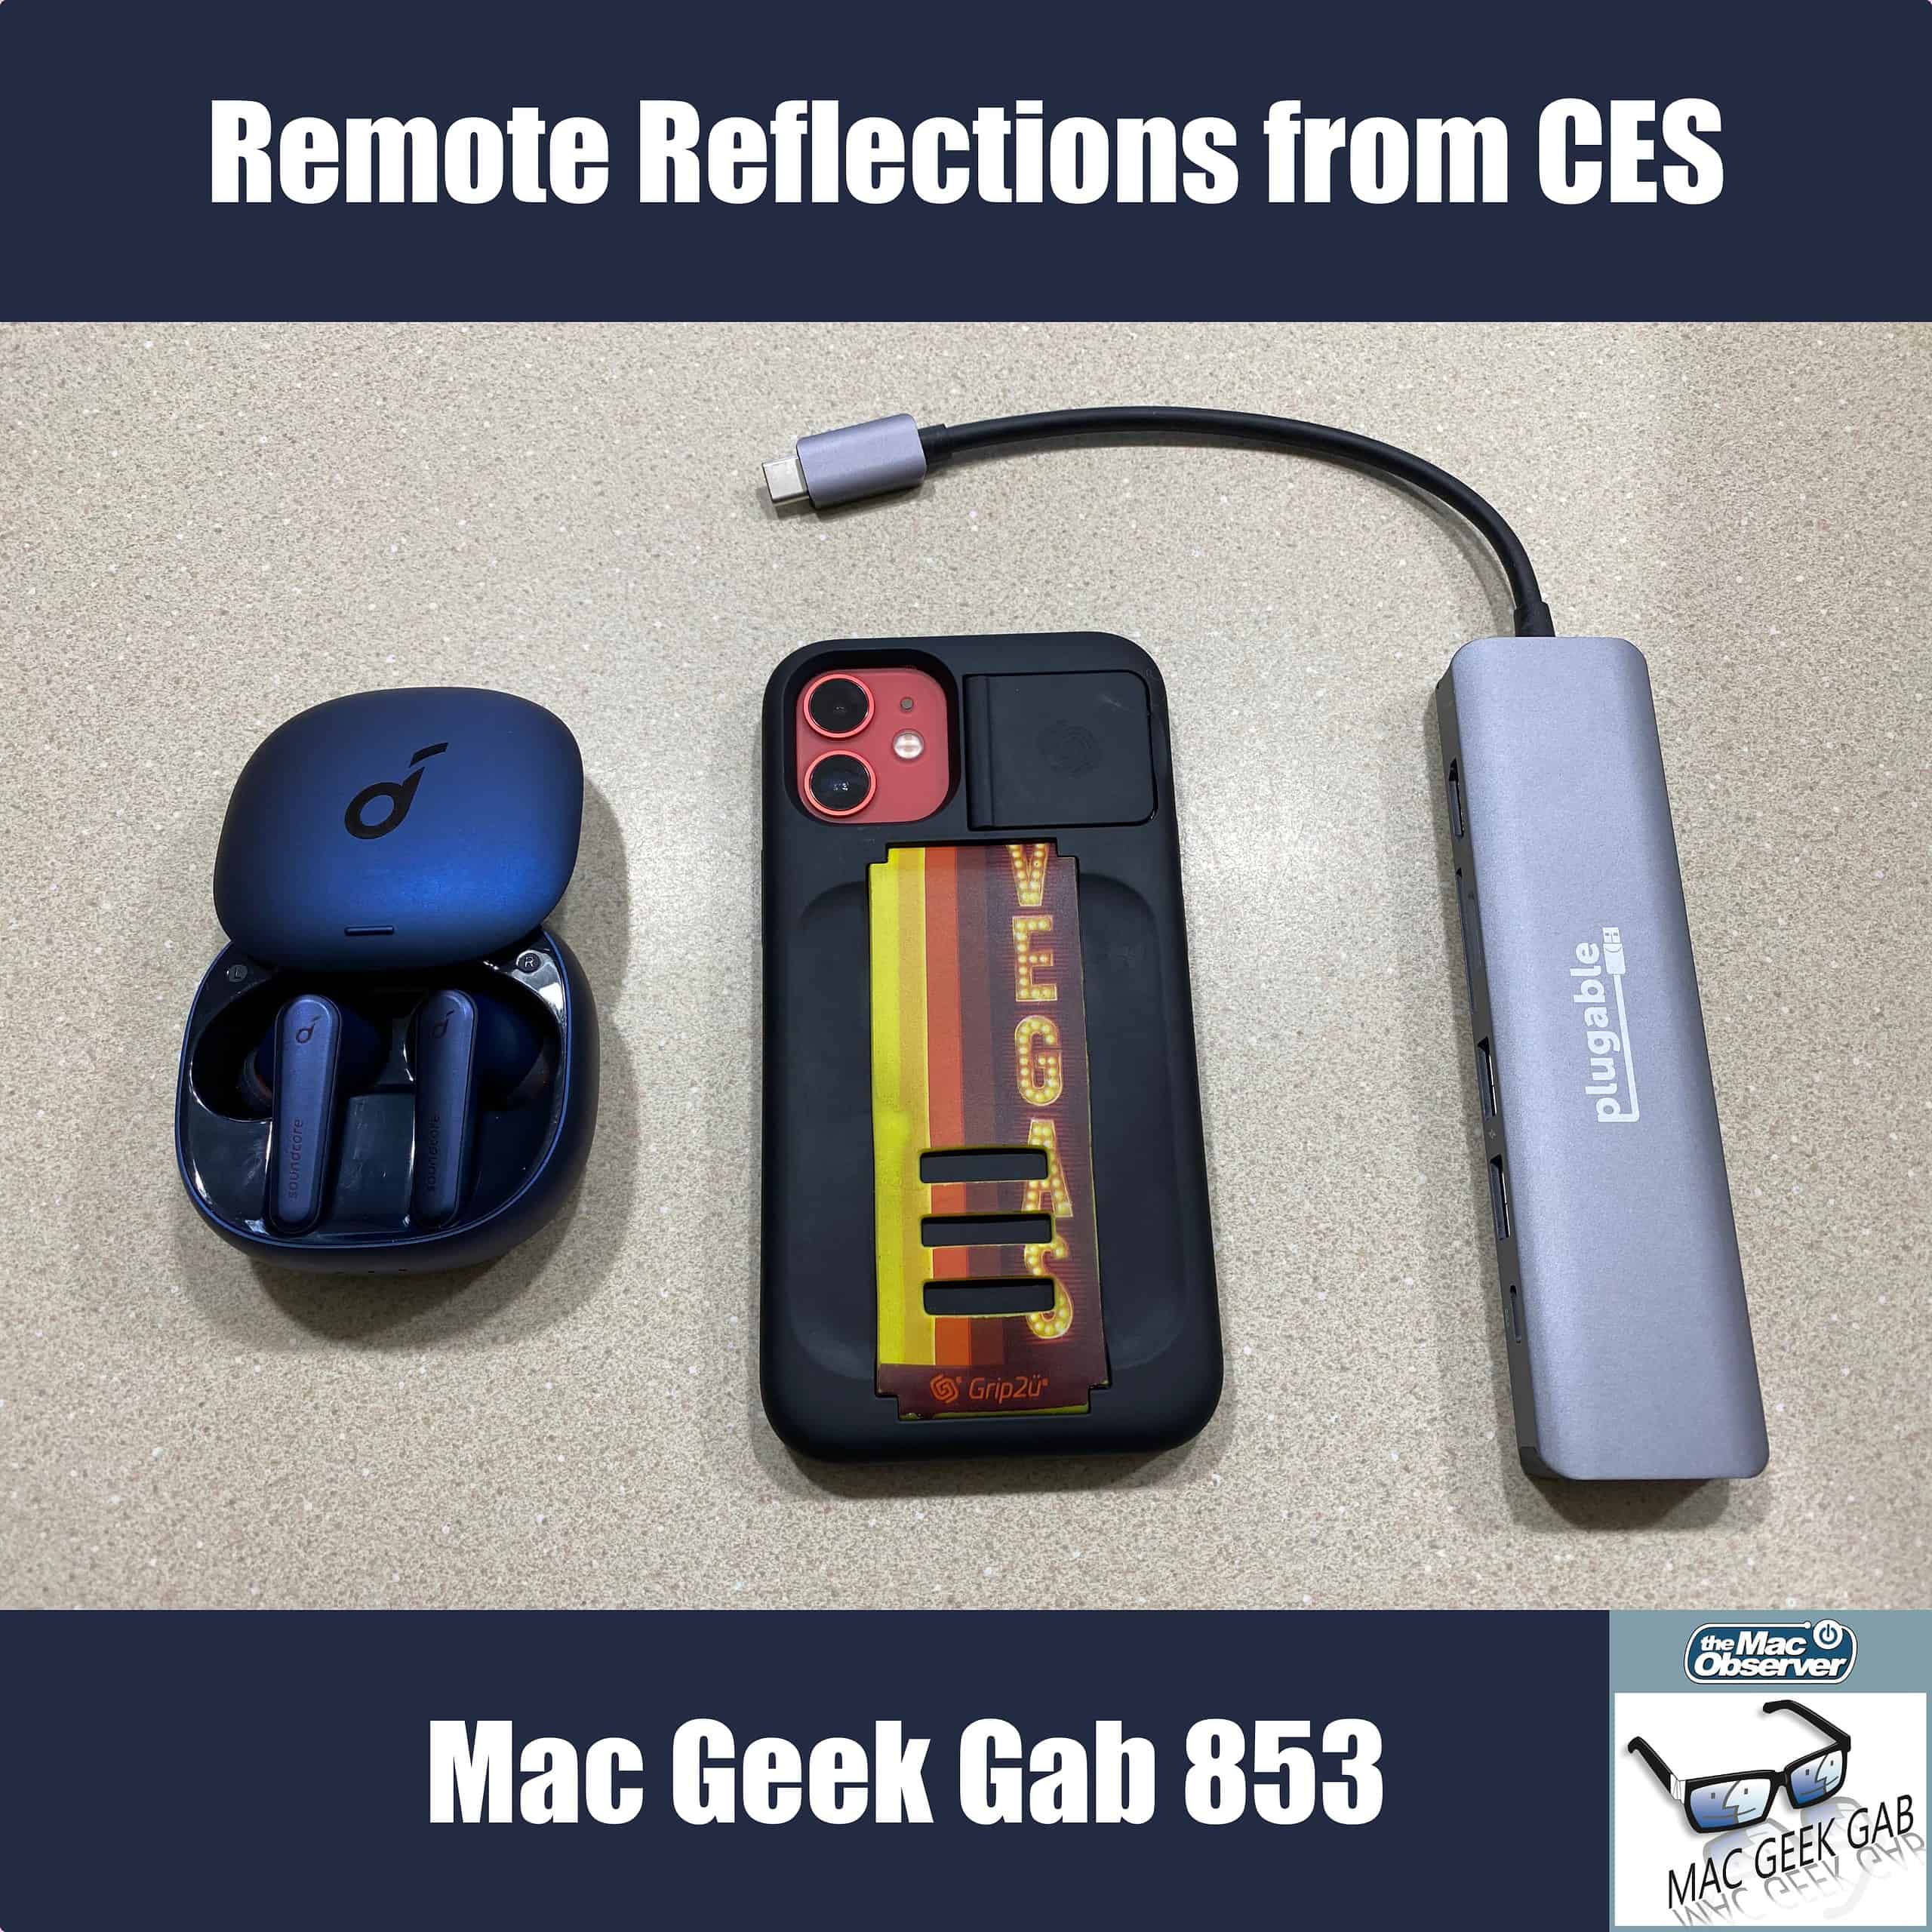 Remote Reflections from CES — Mac Geek Gab 853